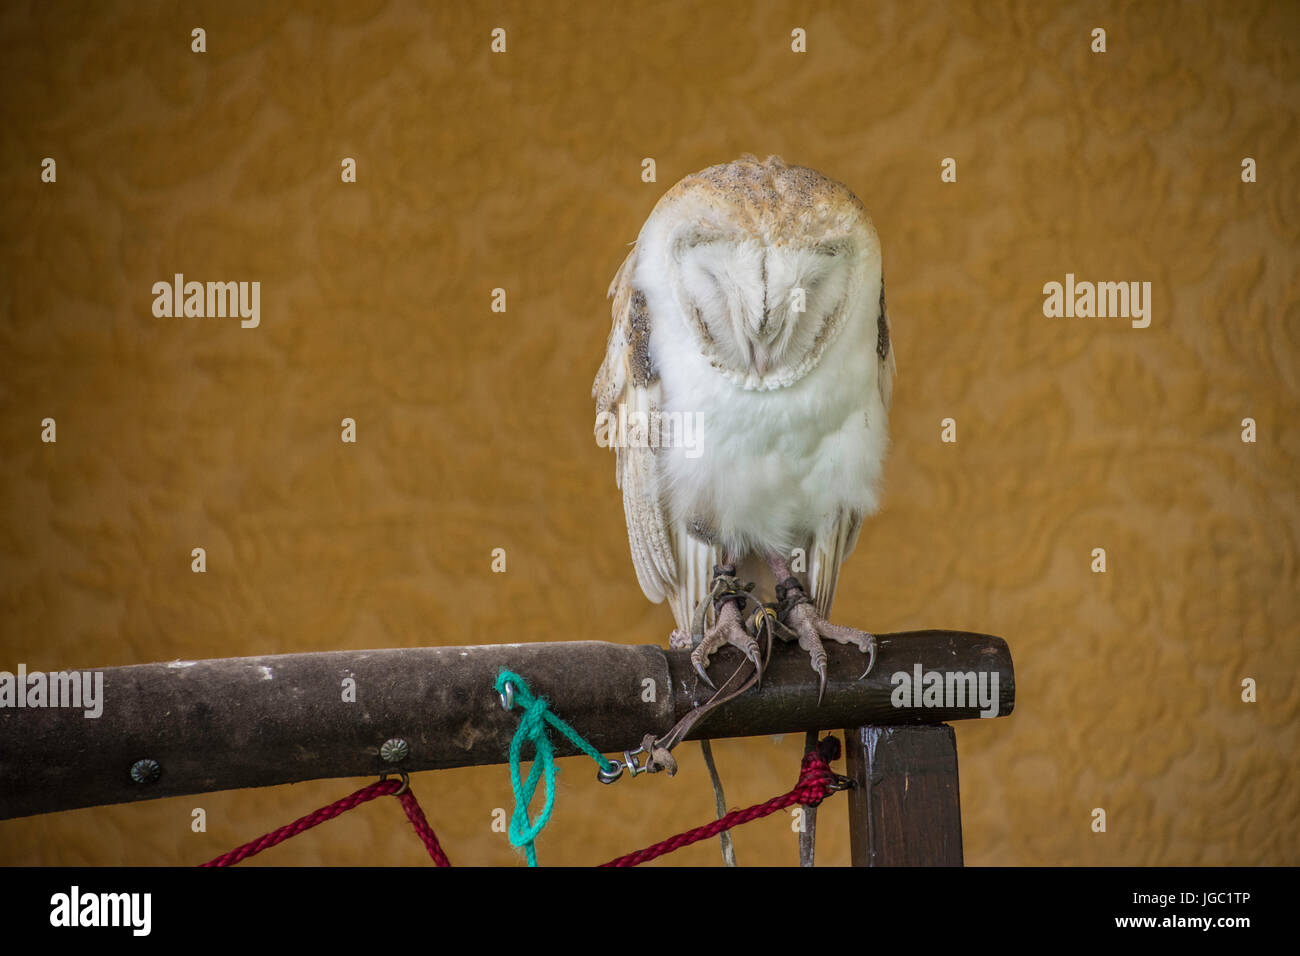 A sleeping captive owl perched on a wooden bar Stock Photo